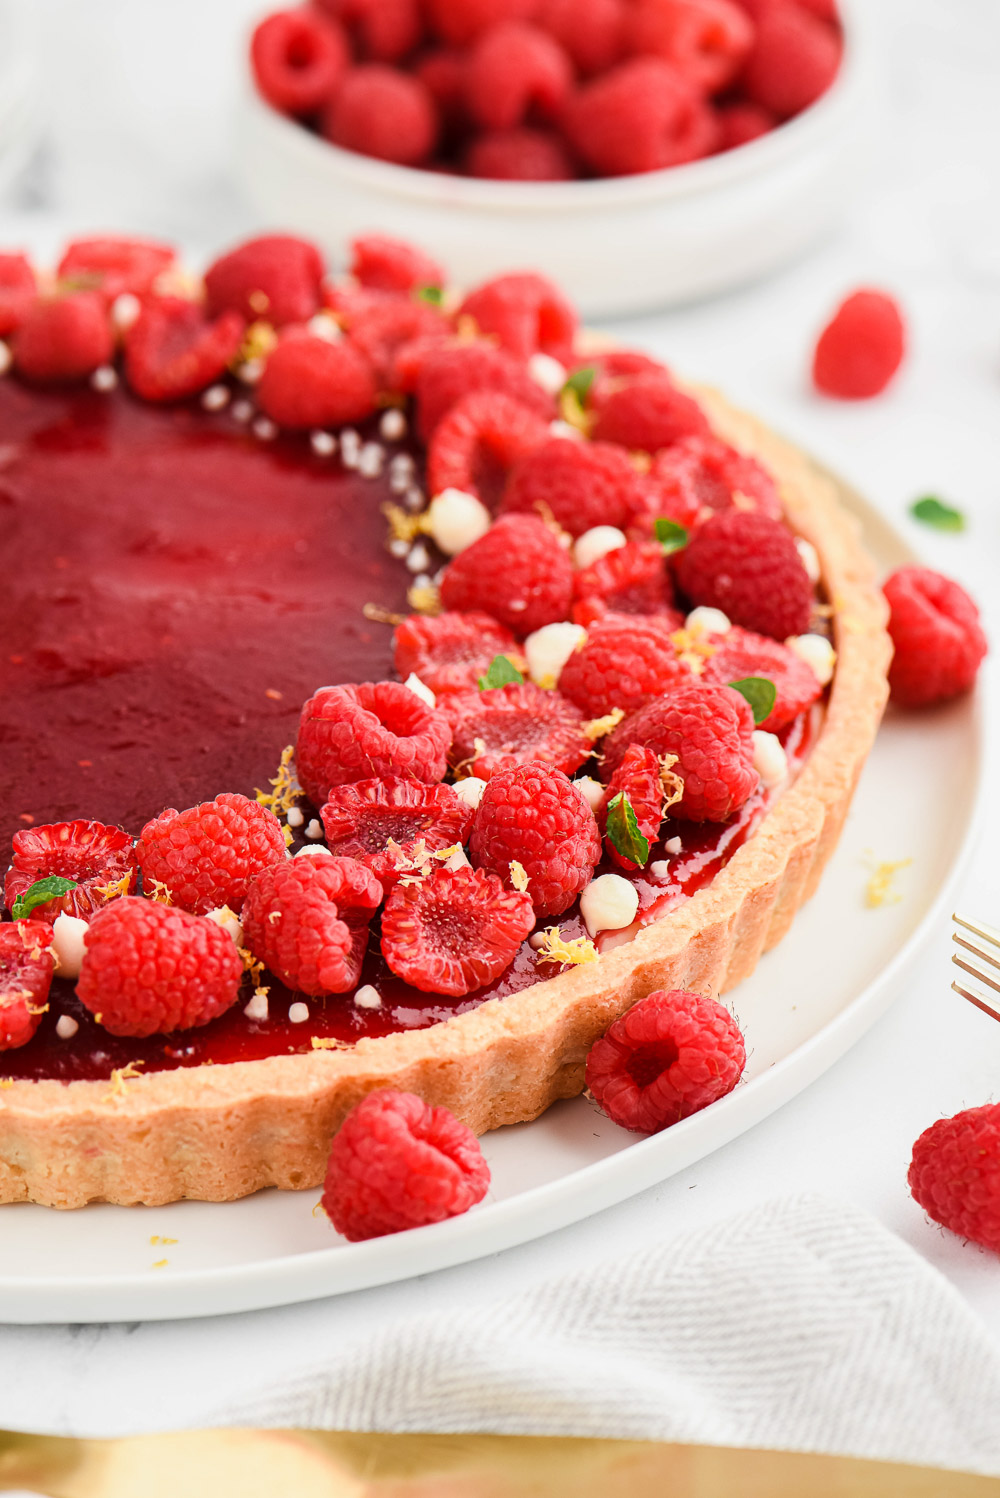 Raspberry fruit tart on a white plate with raspberries, mint leaves and a gold fork.